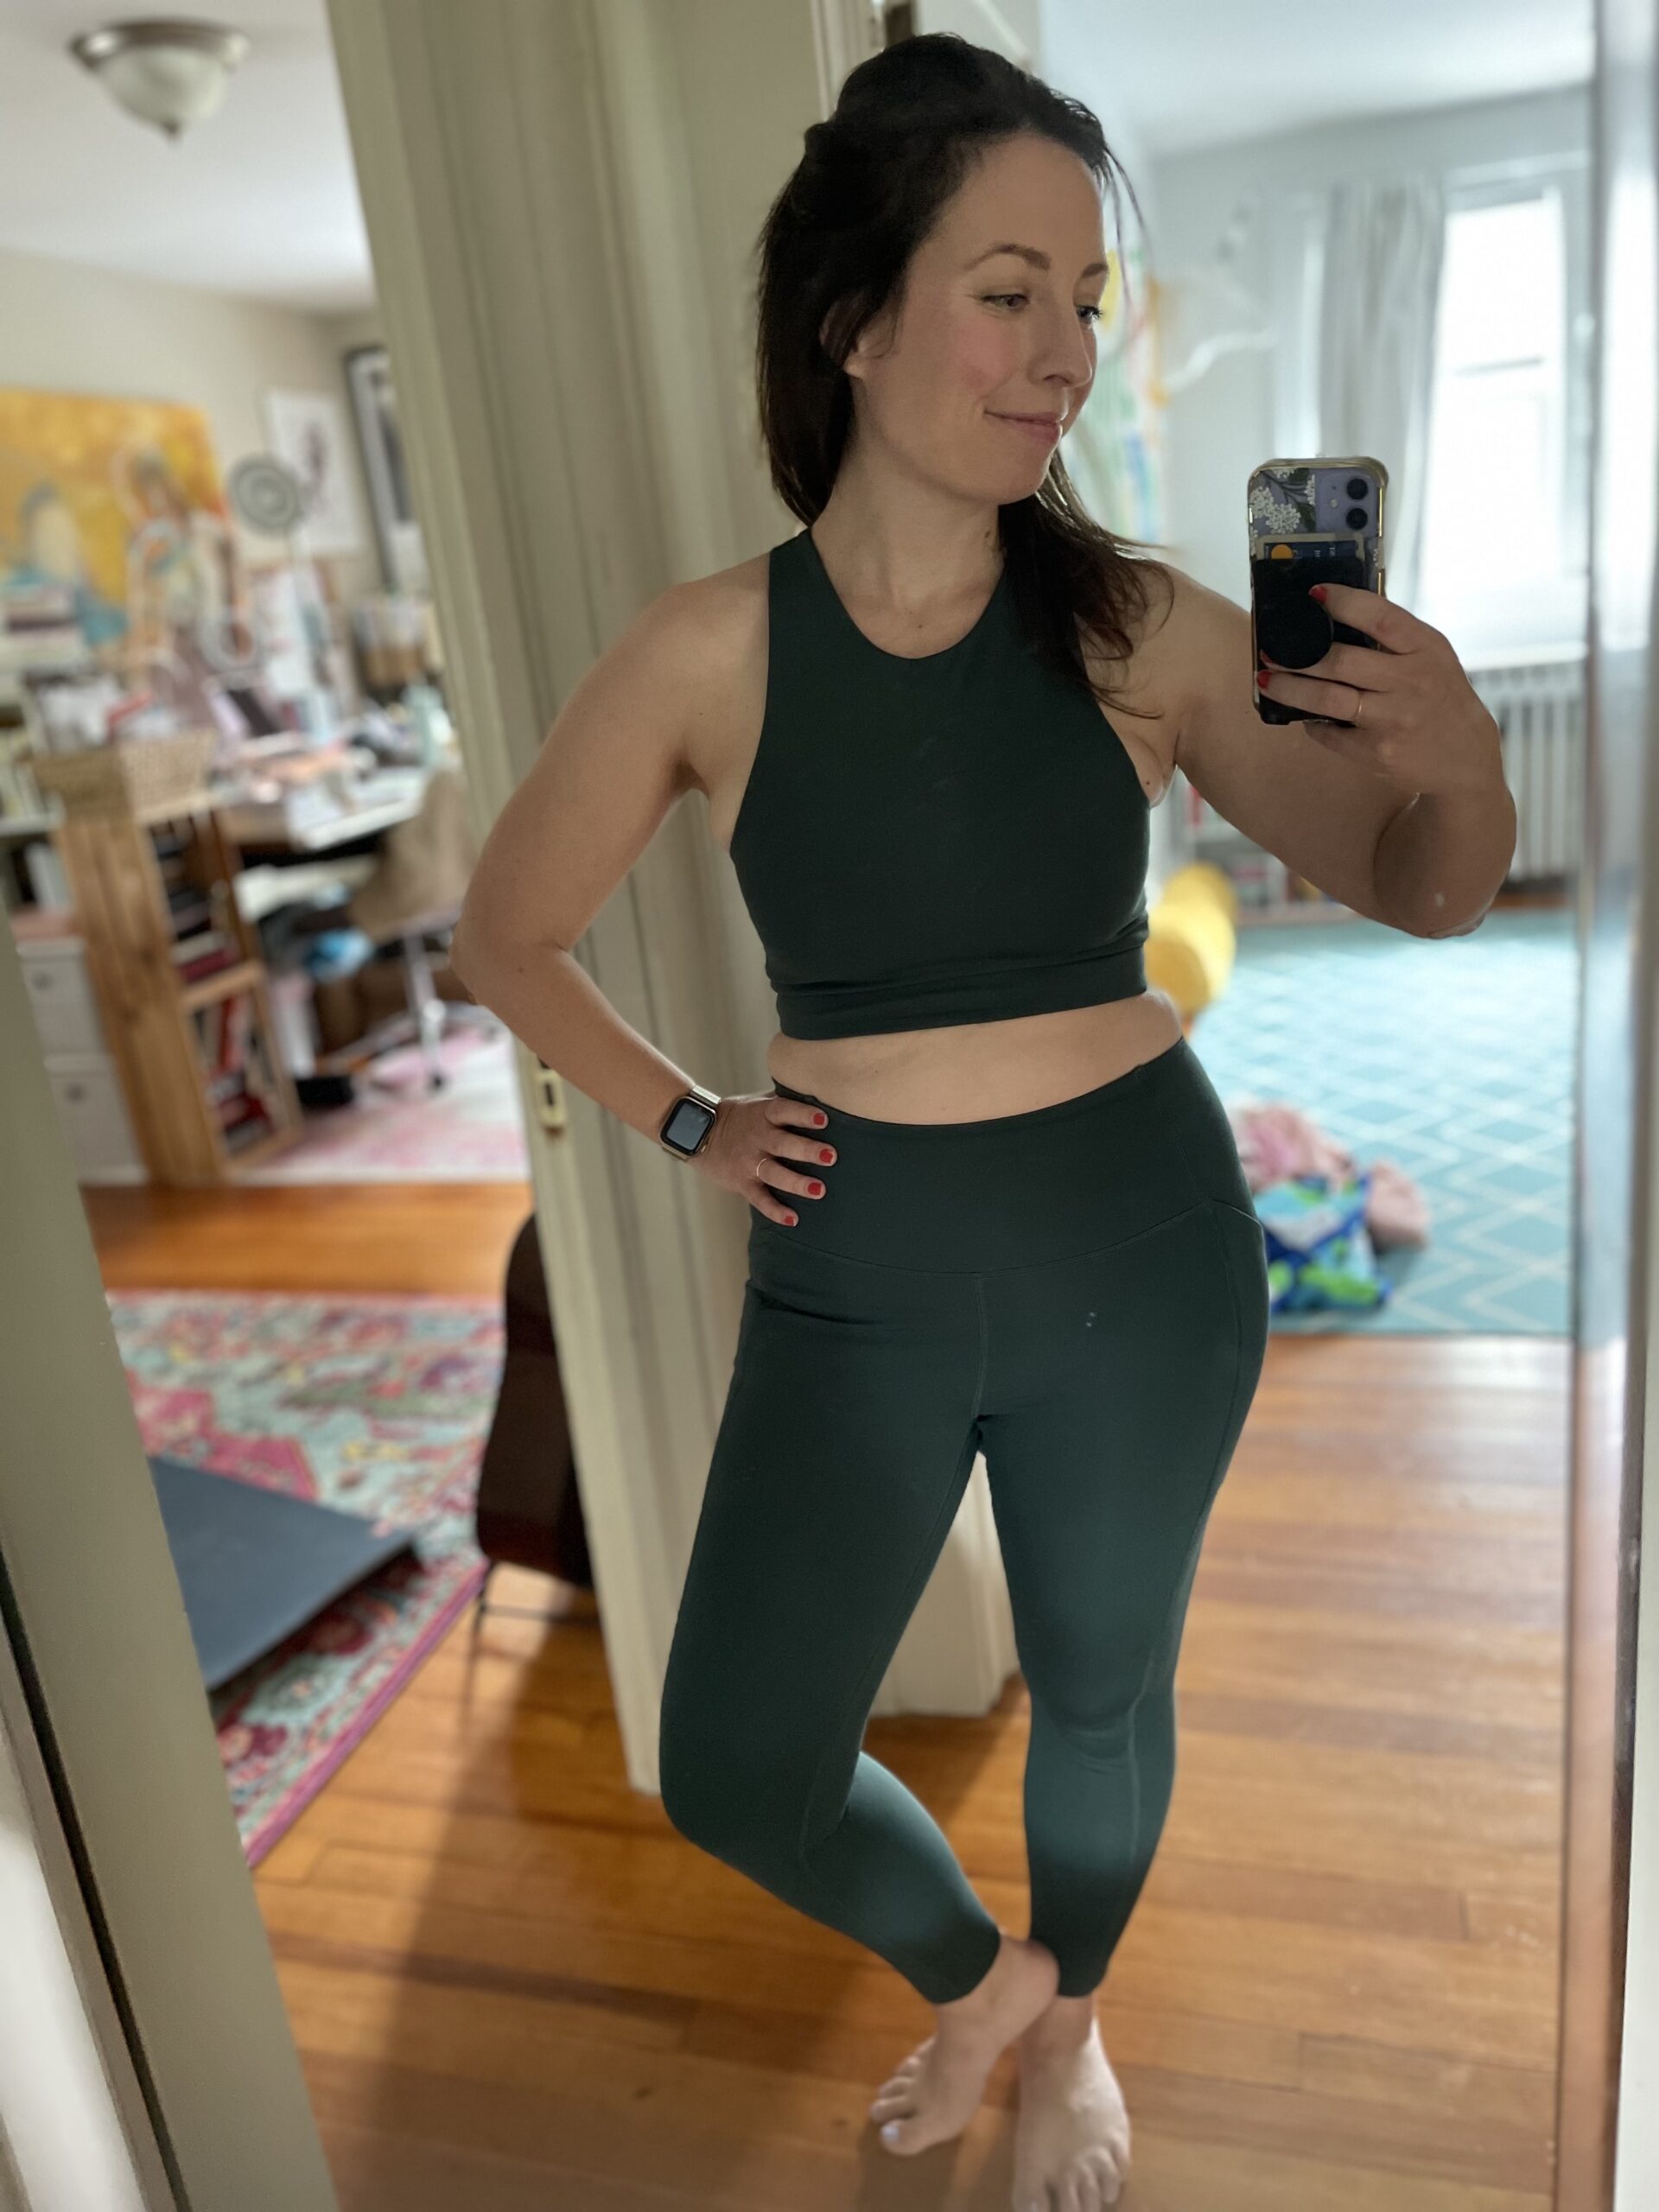 A woman takes a photo of herself wearing a sports bra and leggings in a full length mirror.